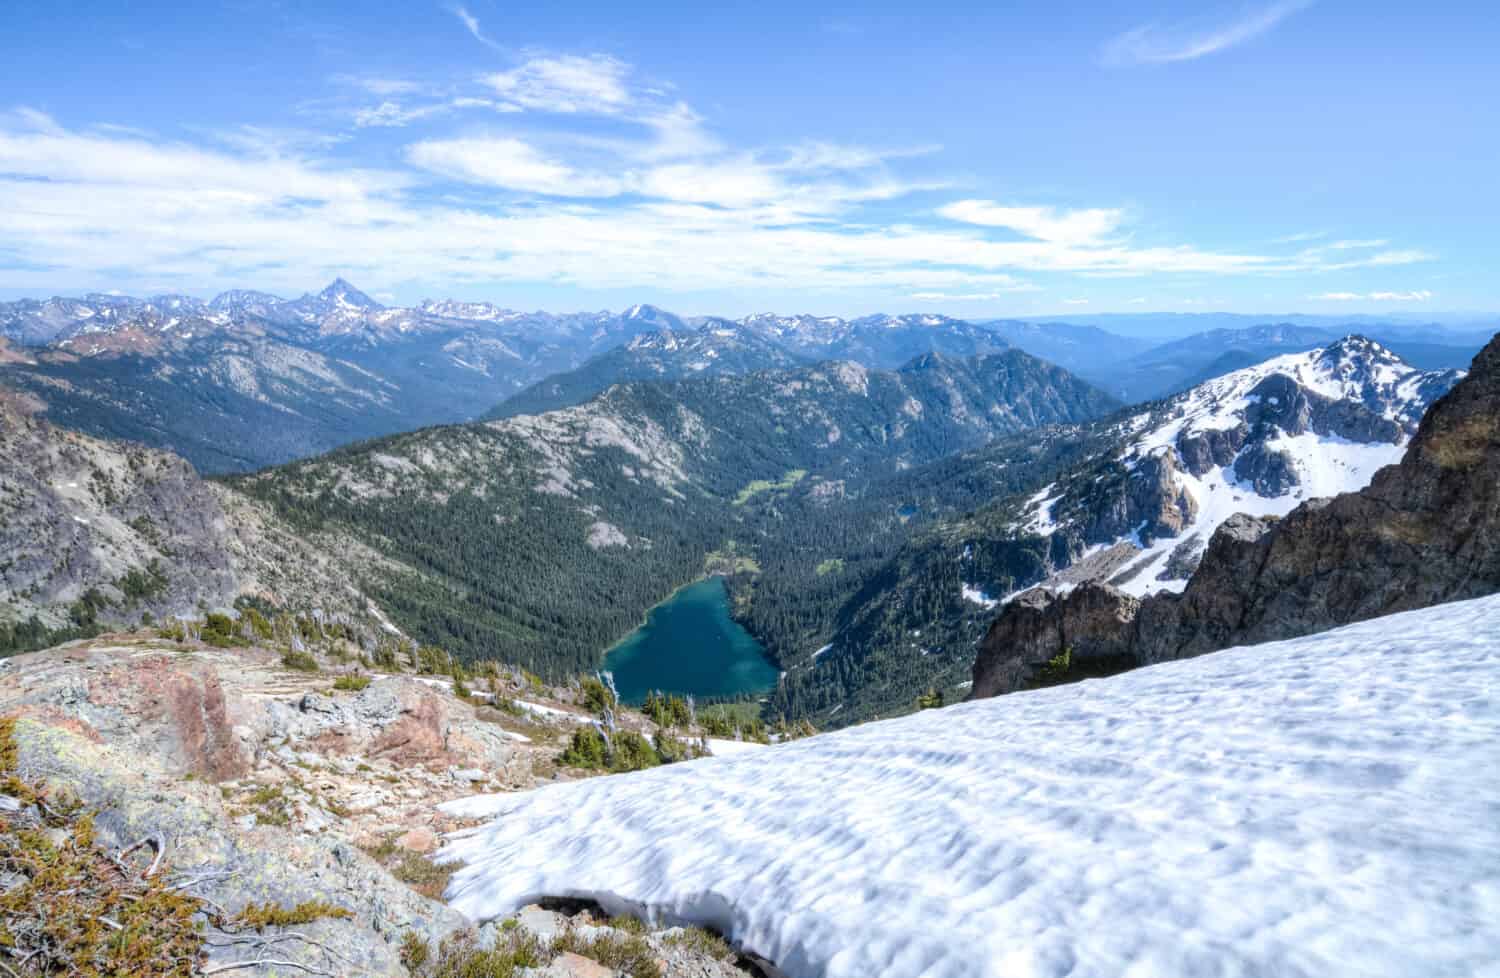 View from the summit of Mt. Daniel in the Alpine Lakes Wilderness, Washington